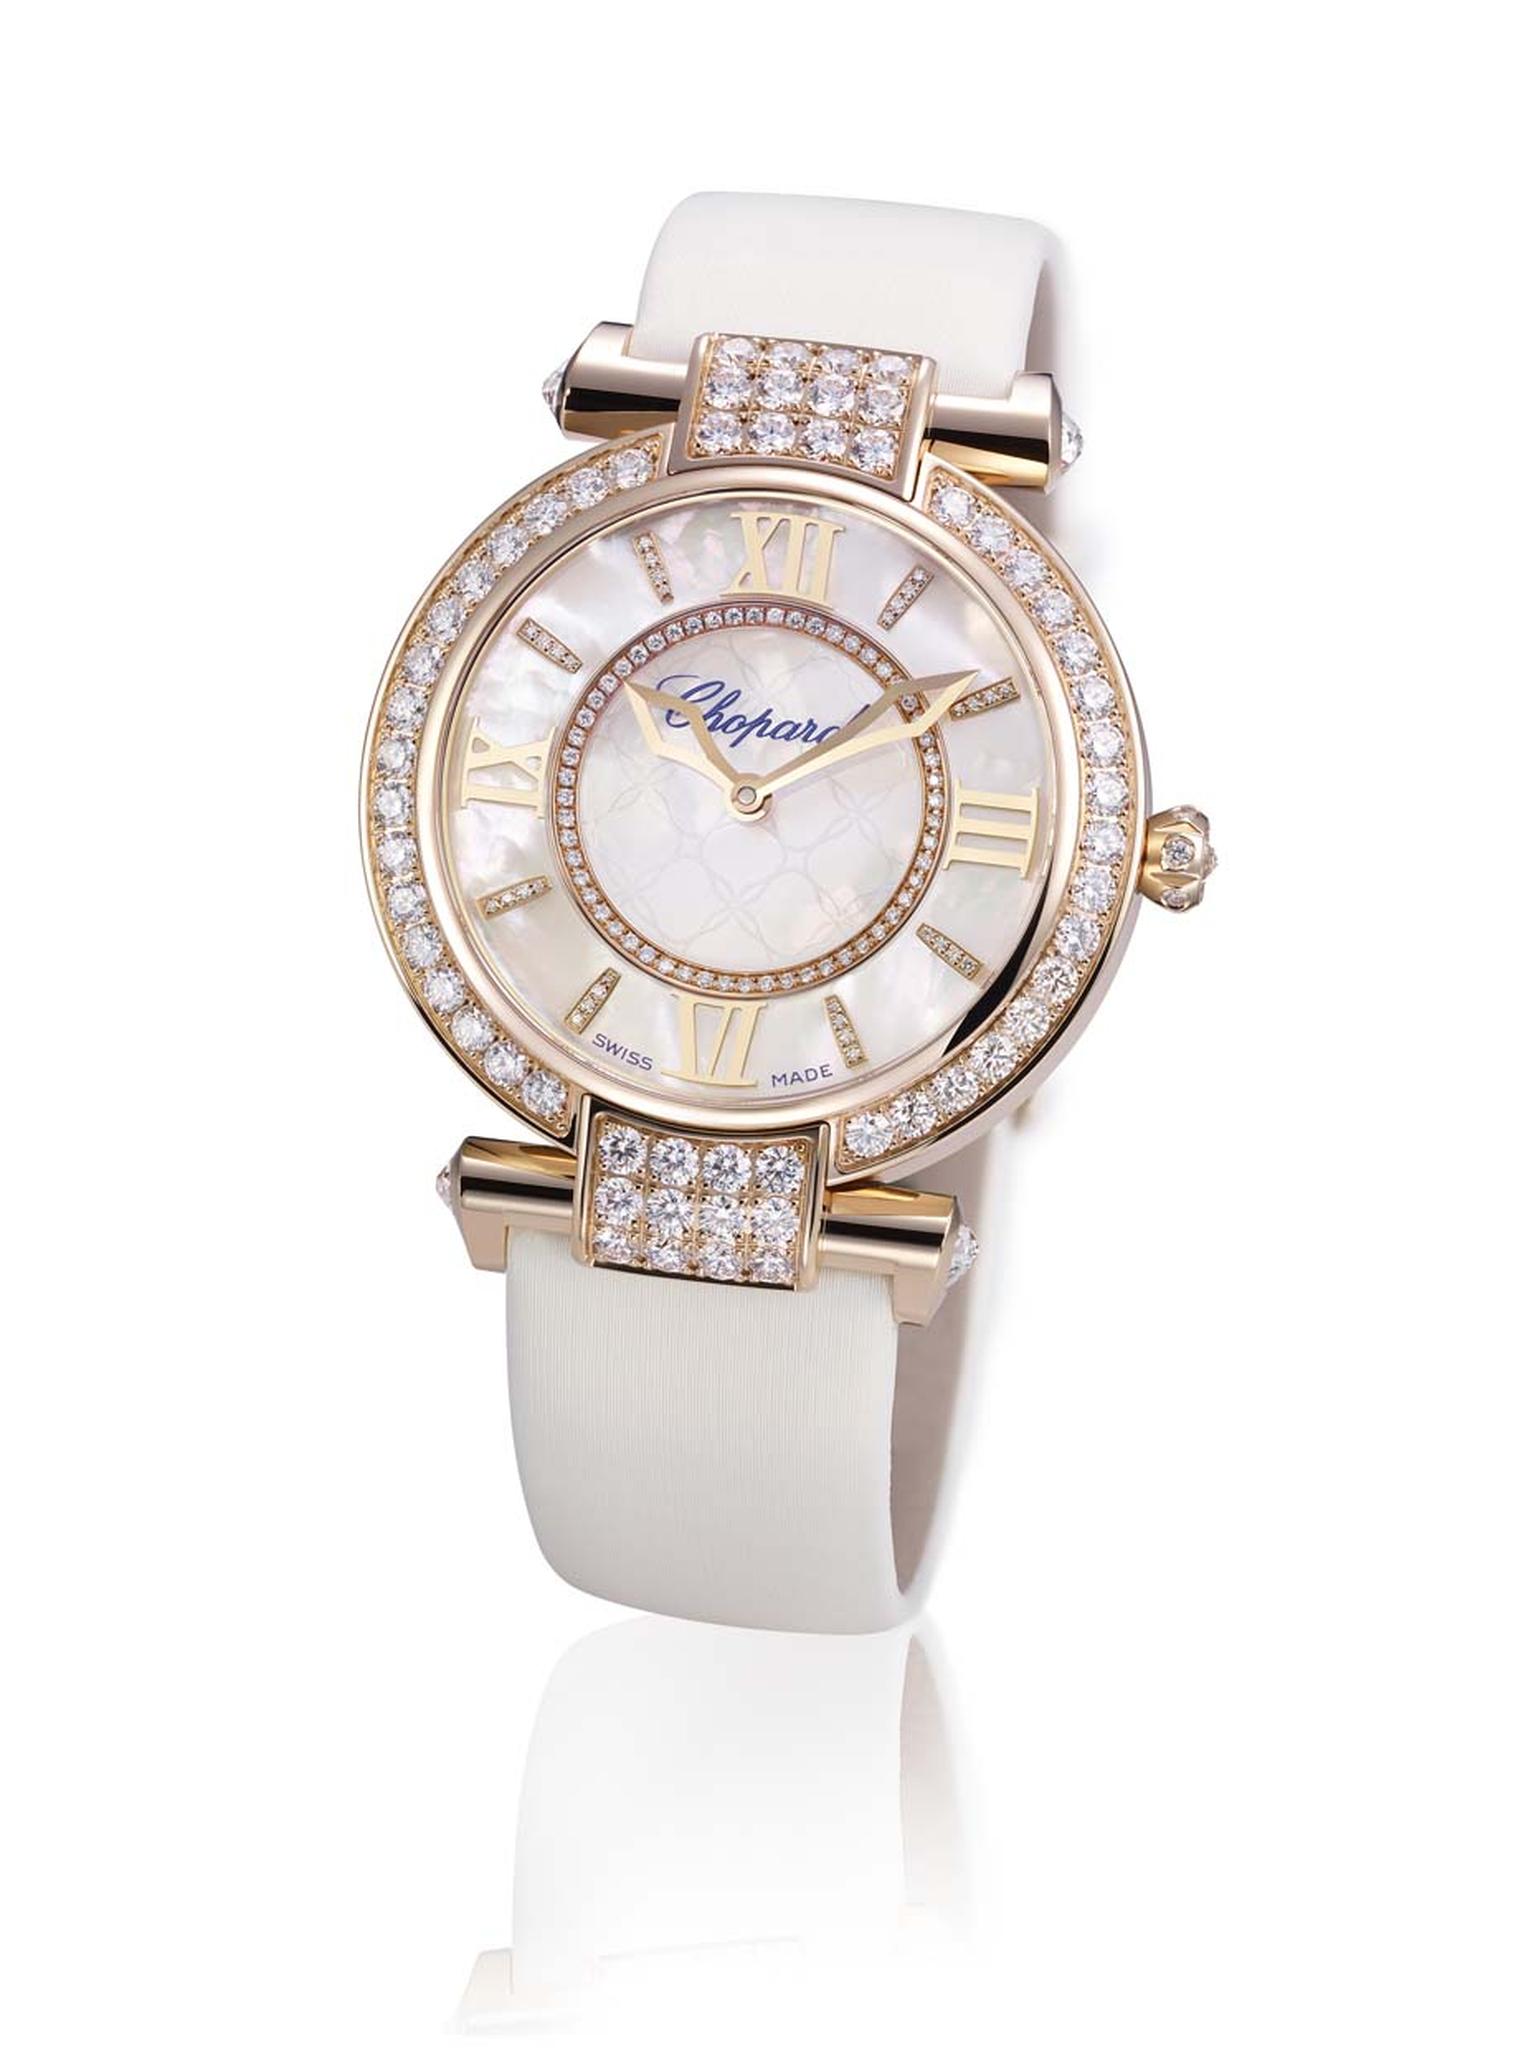 The Chopard Imperiale watch is classical in spirit, with Roman numerals and a round 36mm white gold or rose gold case, the new dial of the has been crafted in shimmering lavender, pink or white mother-of-pearl.